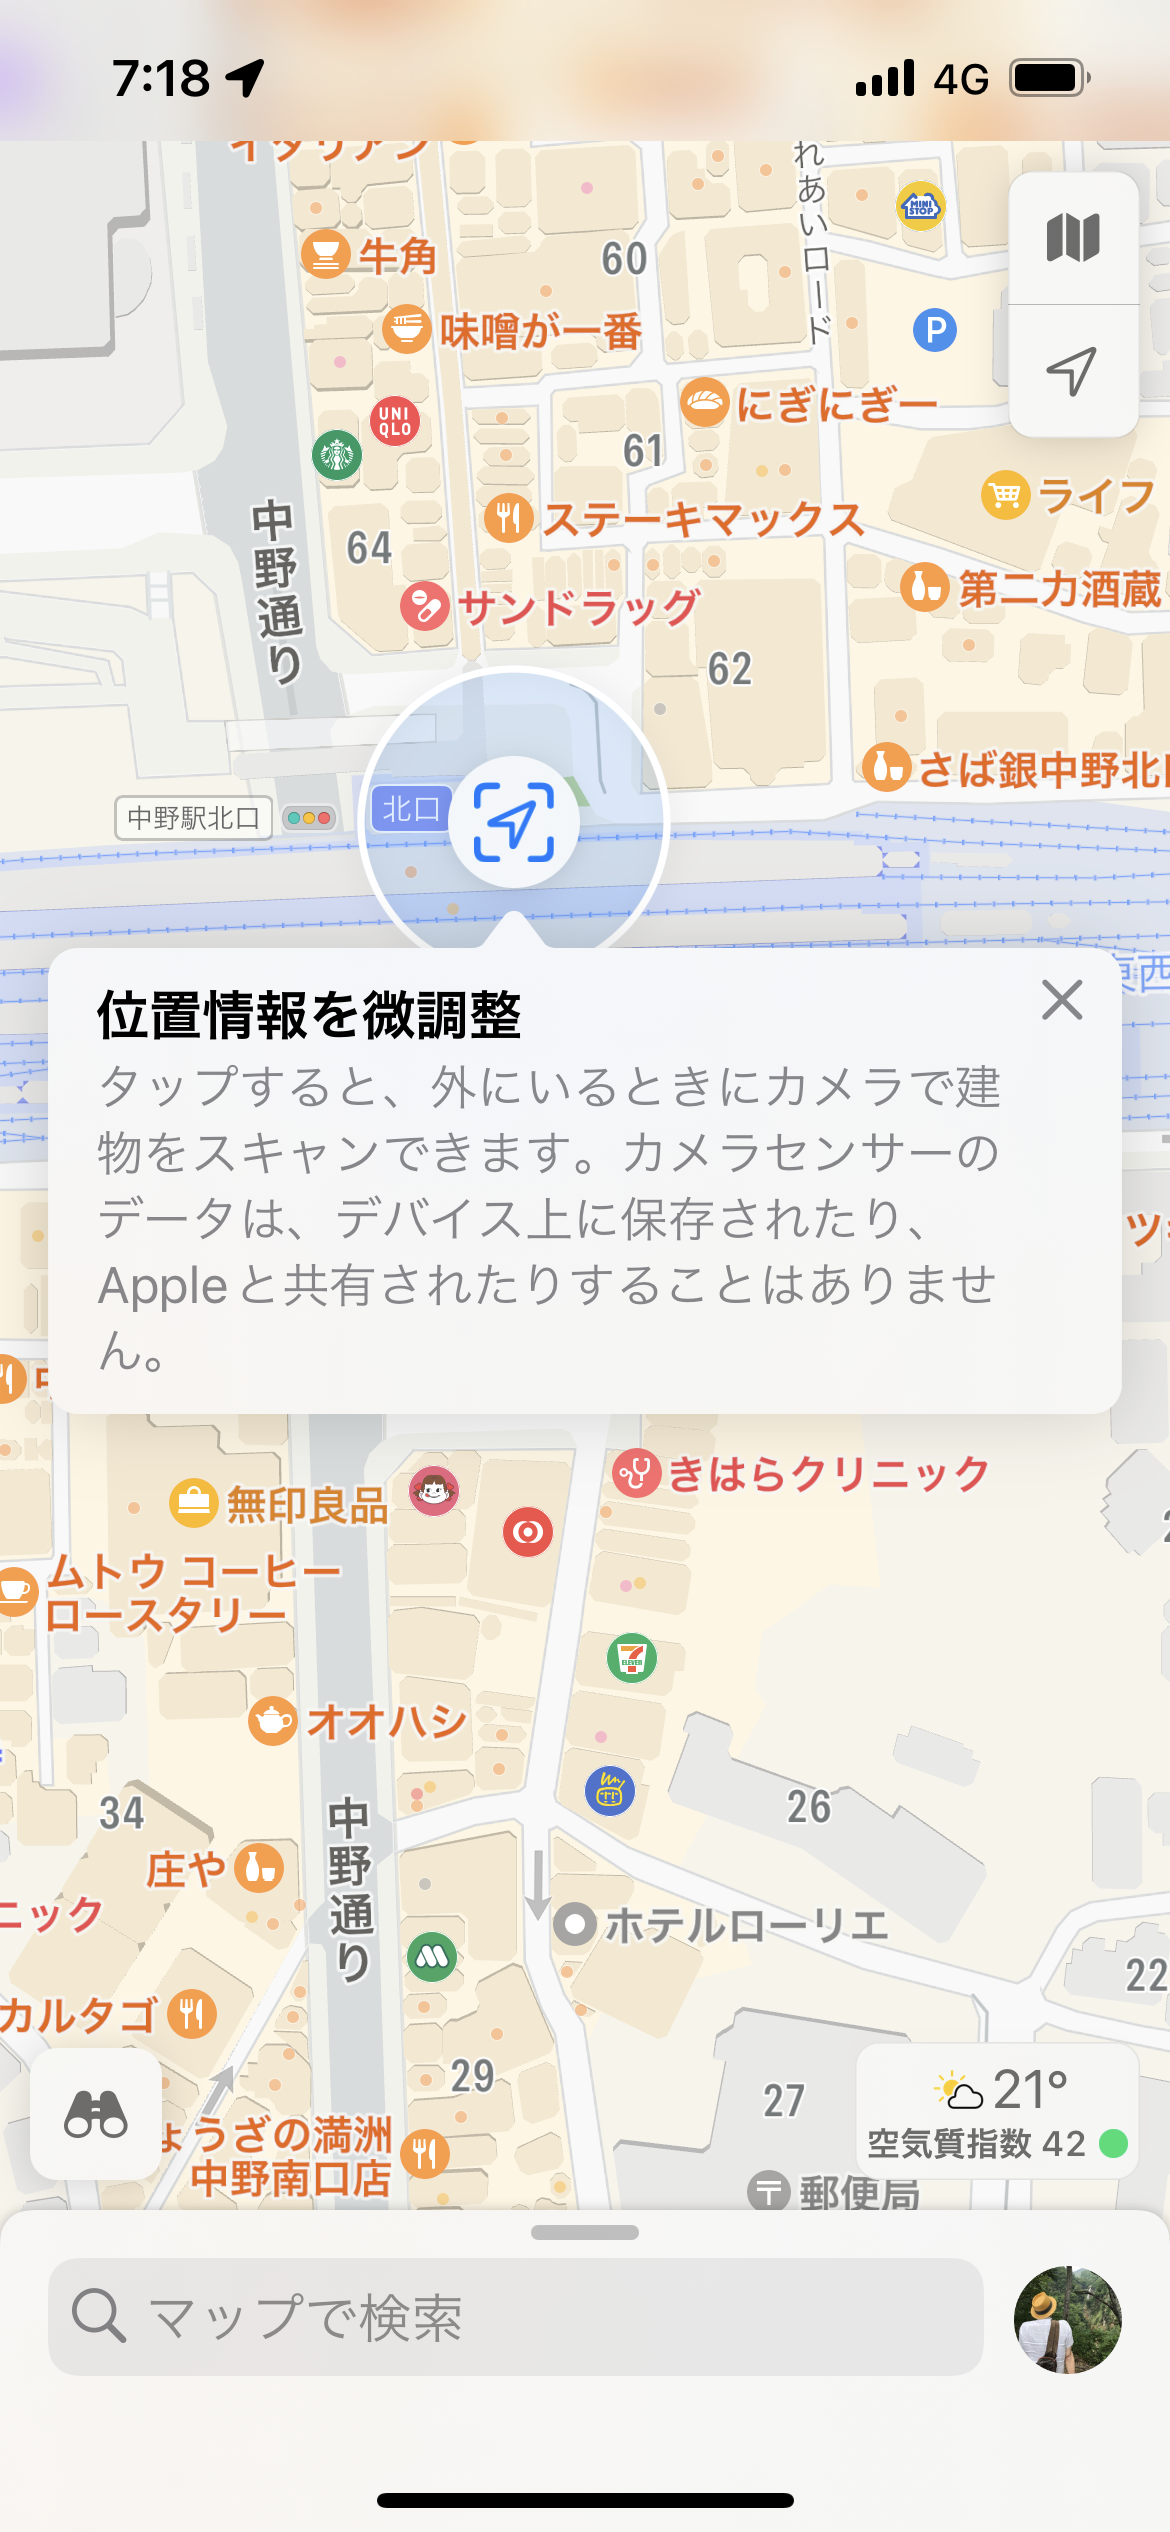 Apple Maps step-by-step walking guidance in augmented reality comes to Tokyo – Ata Distance